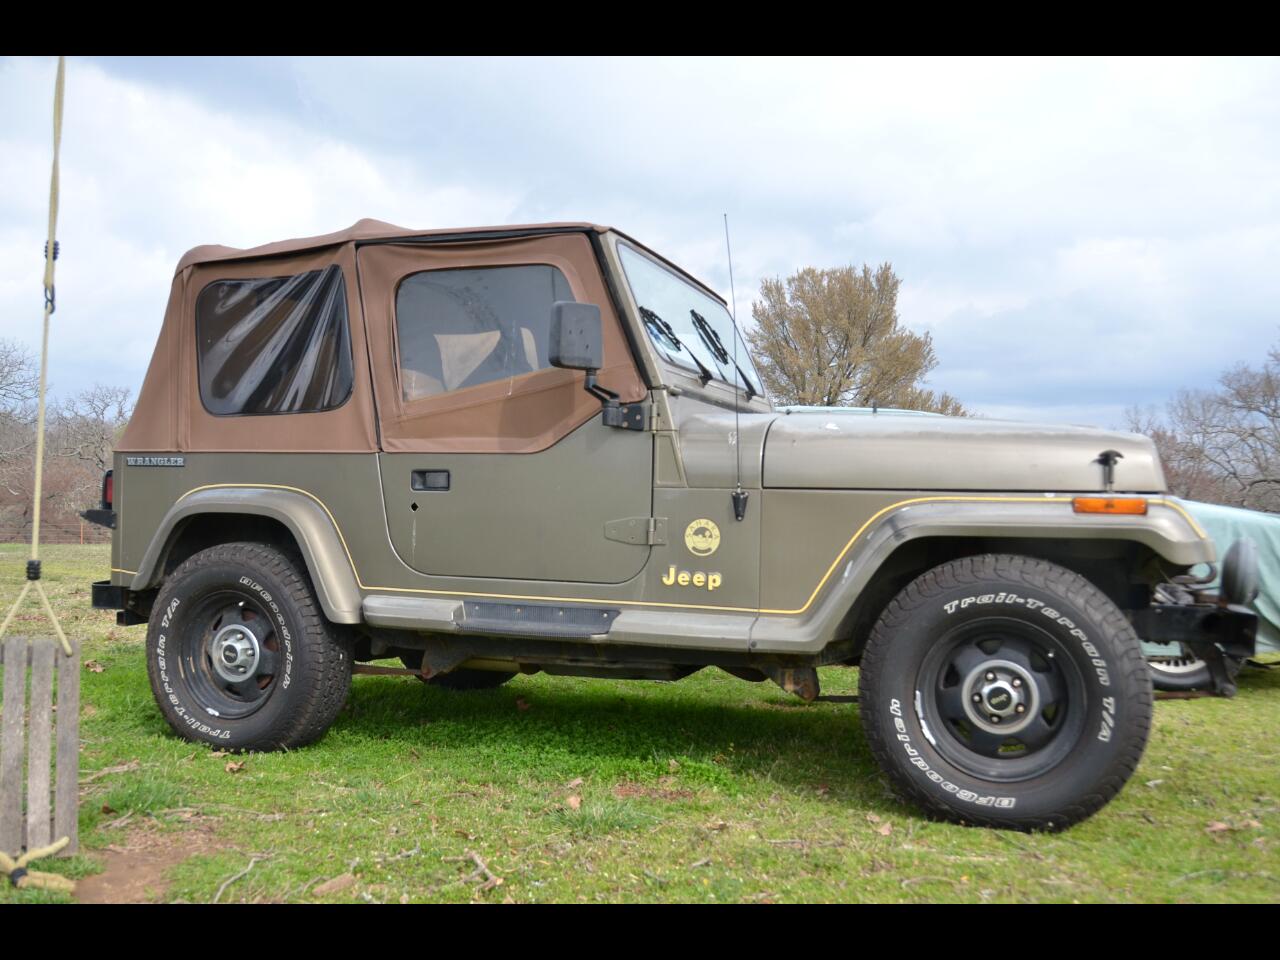 Used 1989 Jeep Wrangler Sahara Soft Top for Sale in Claremore OK 74017  Robert Flynn Cars